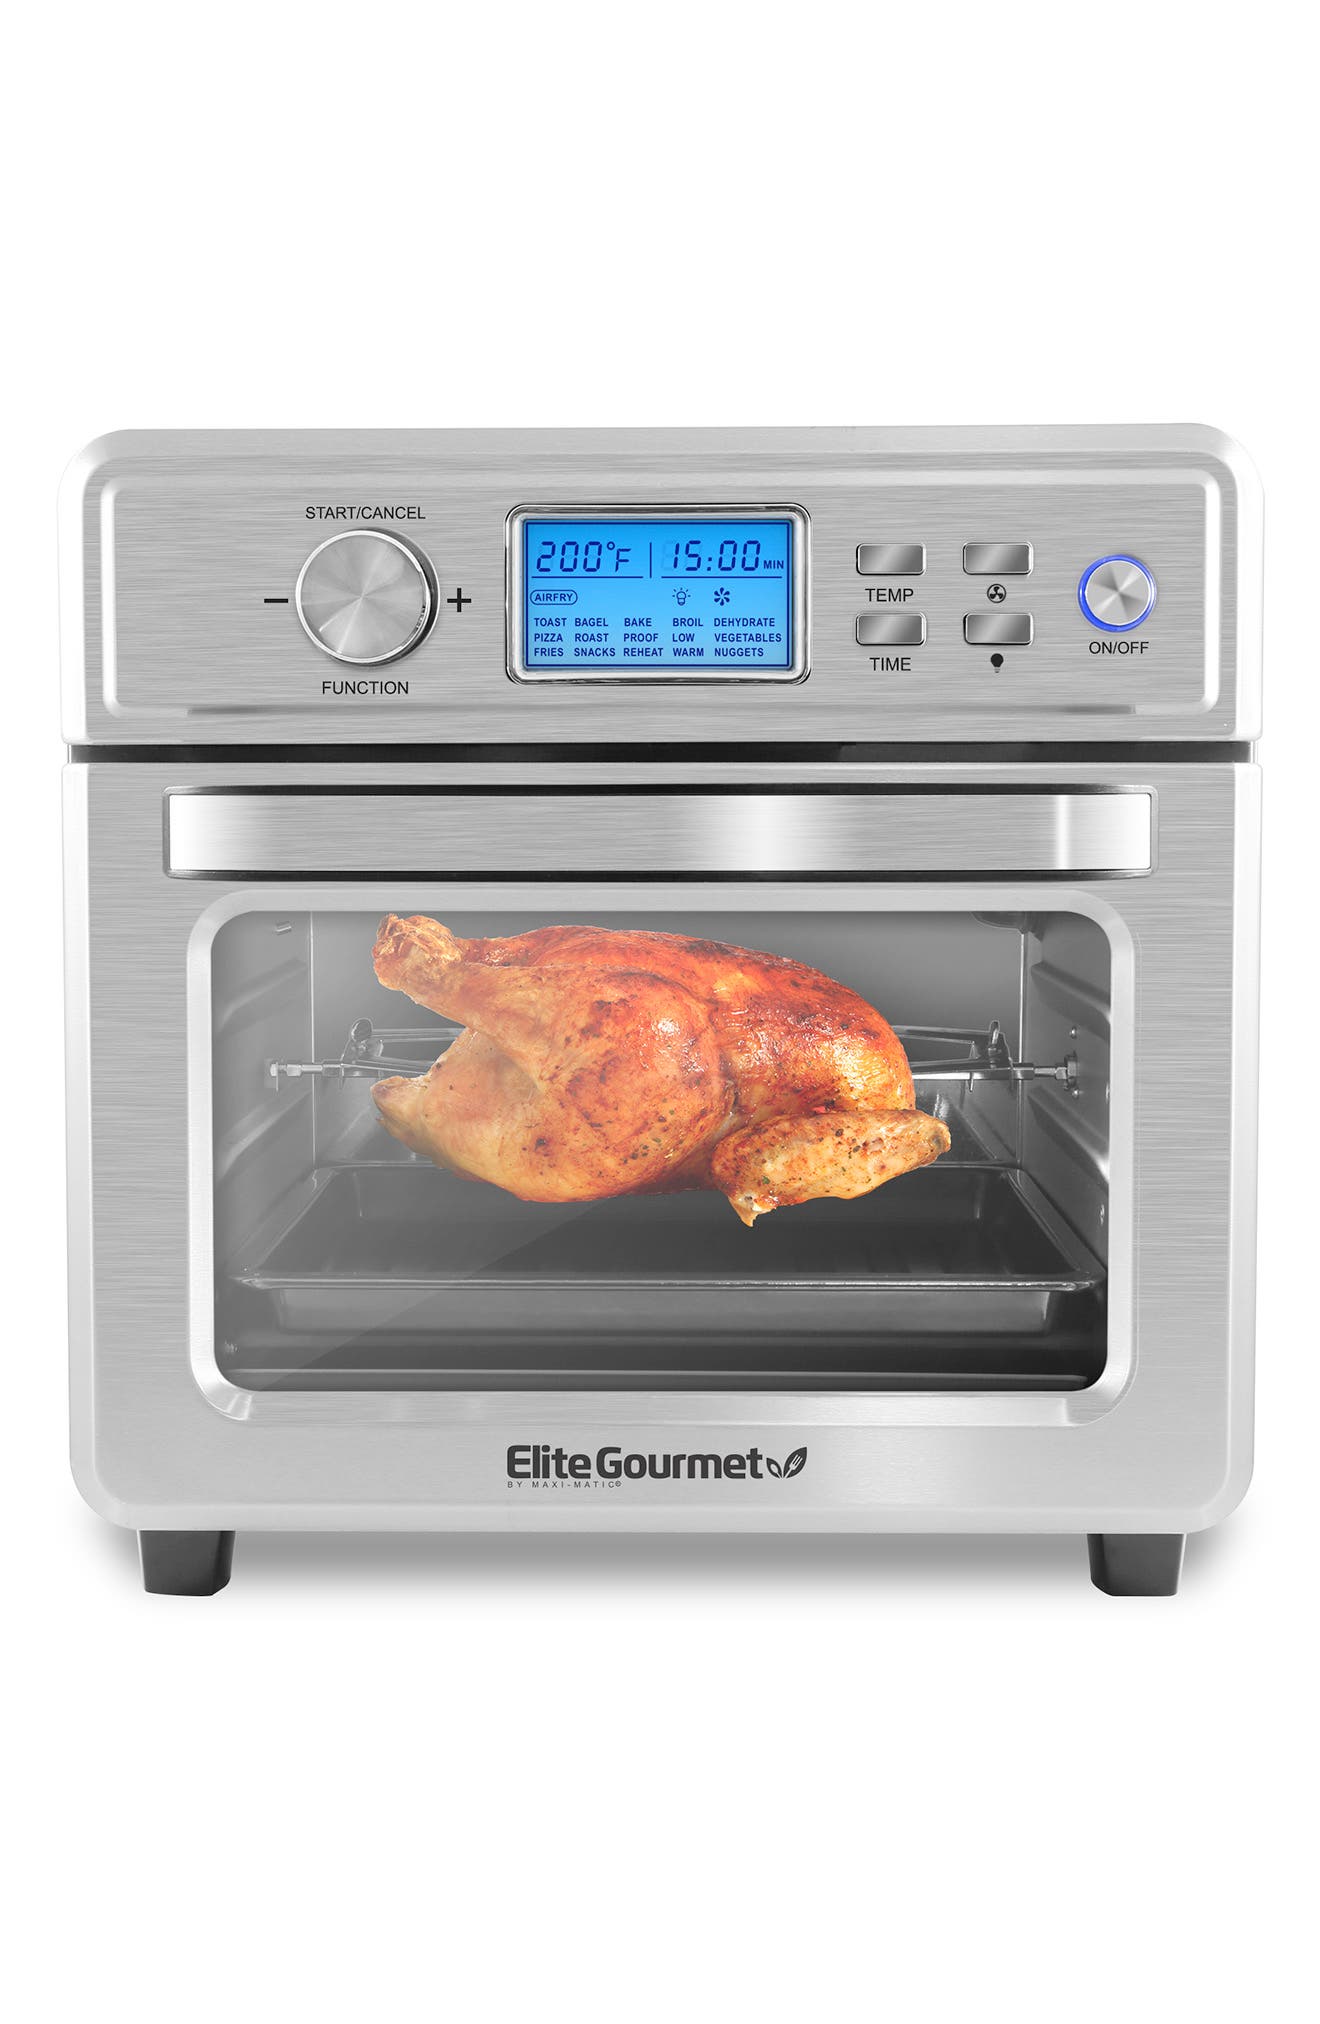 Maxi-matic Elite Eaf8190d Stainless Steel 21l Digital Air Fryer Oven In Silver